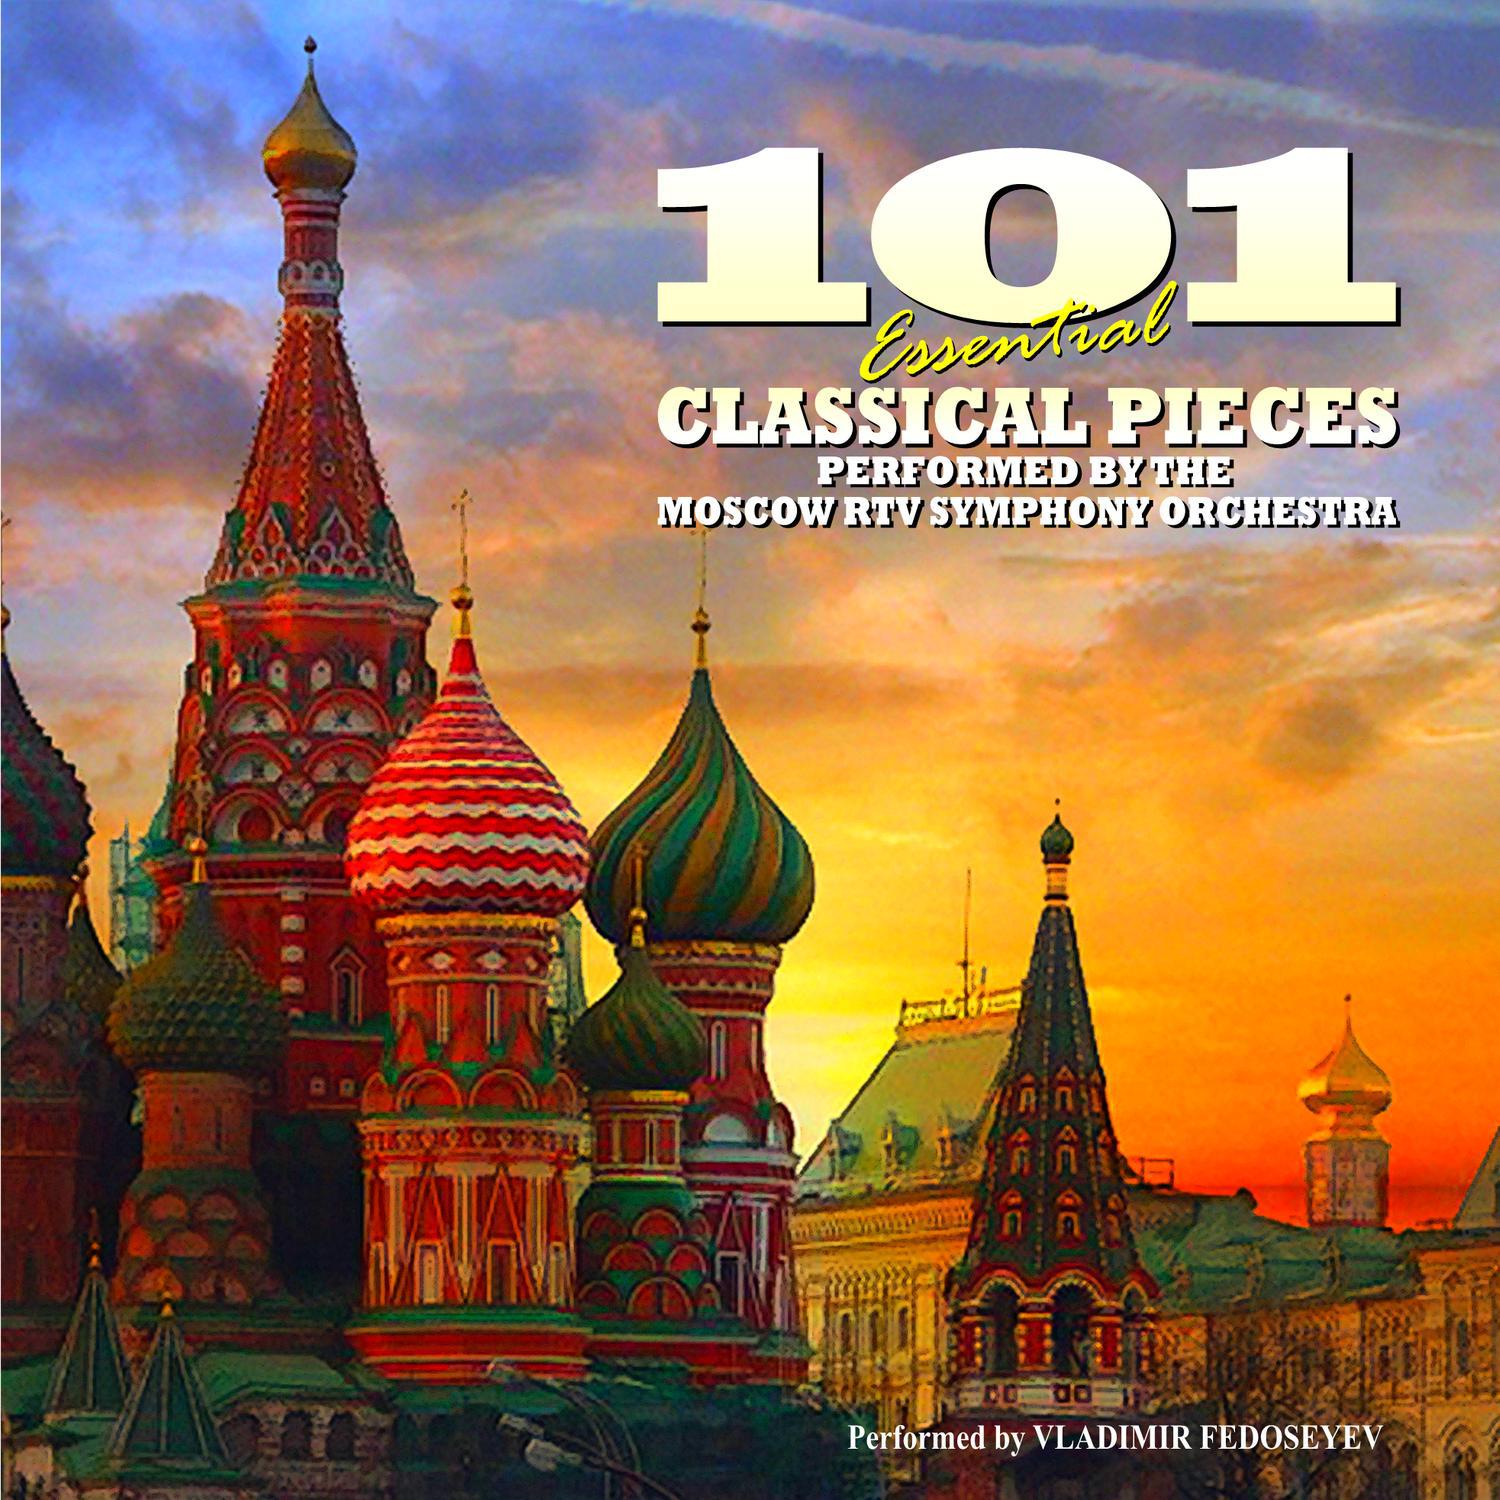 101 Essential Classical Pieces by the Moscow RTV Symphony Orchestra